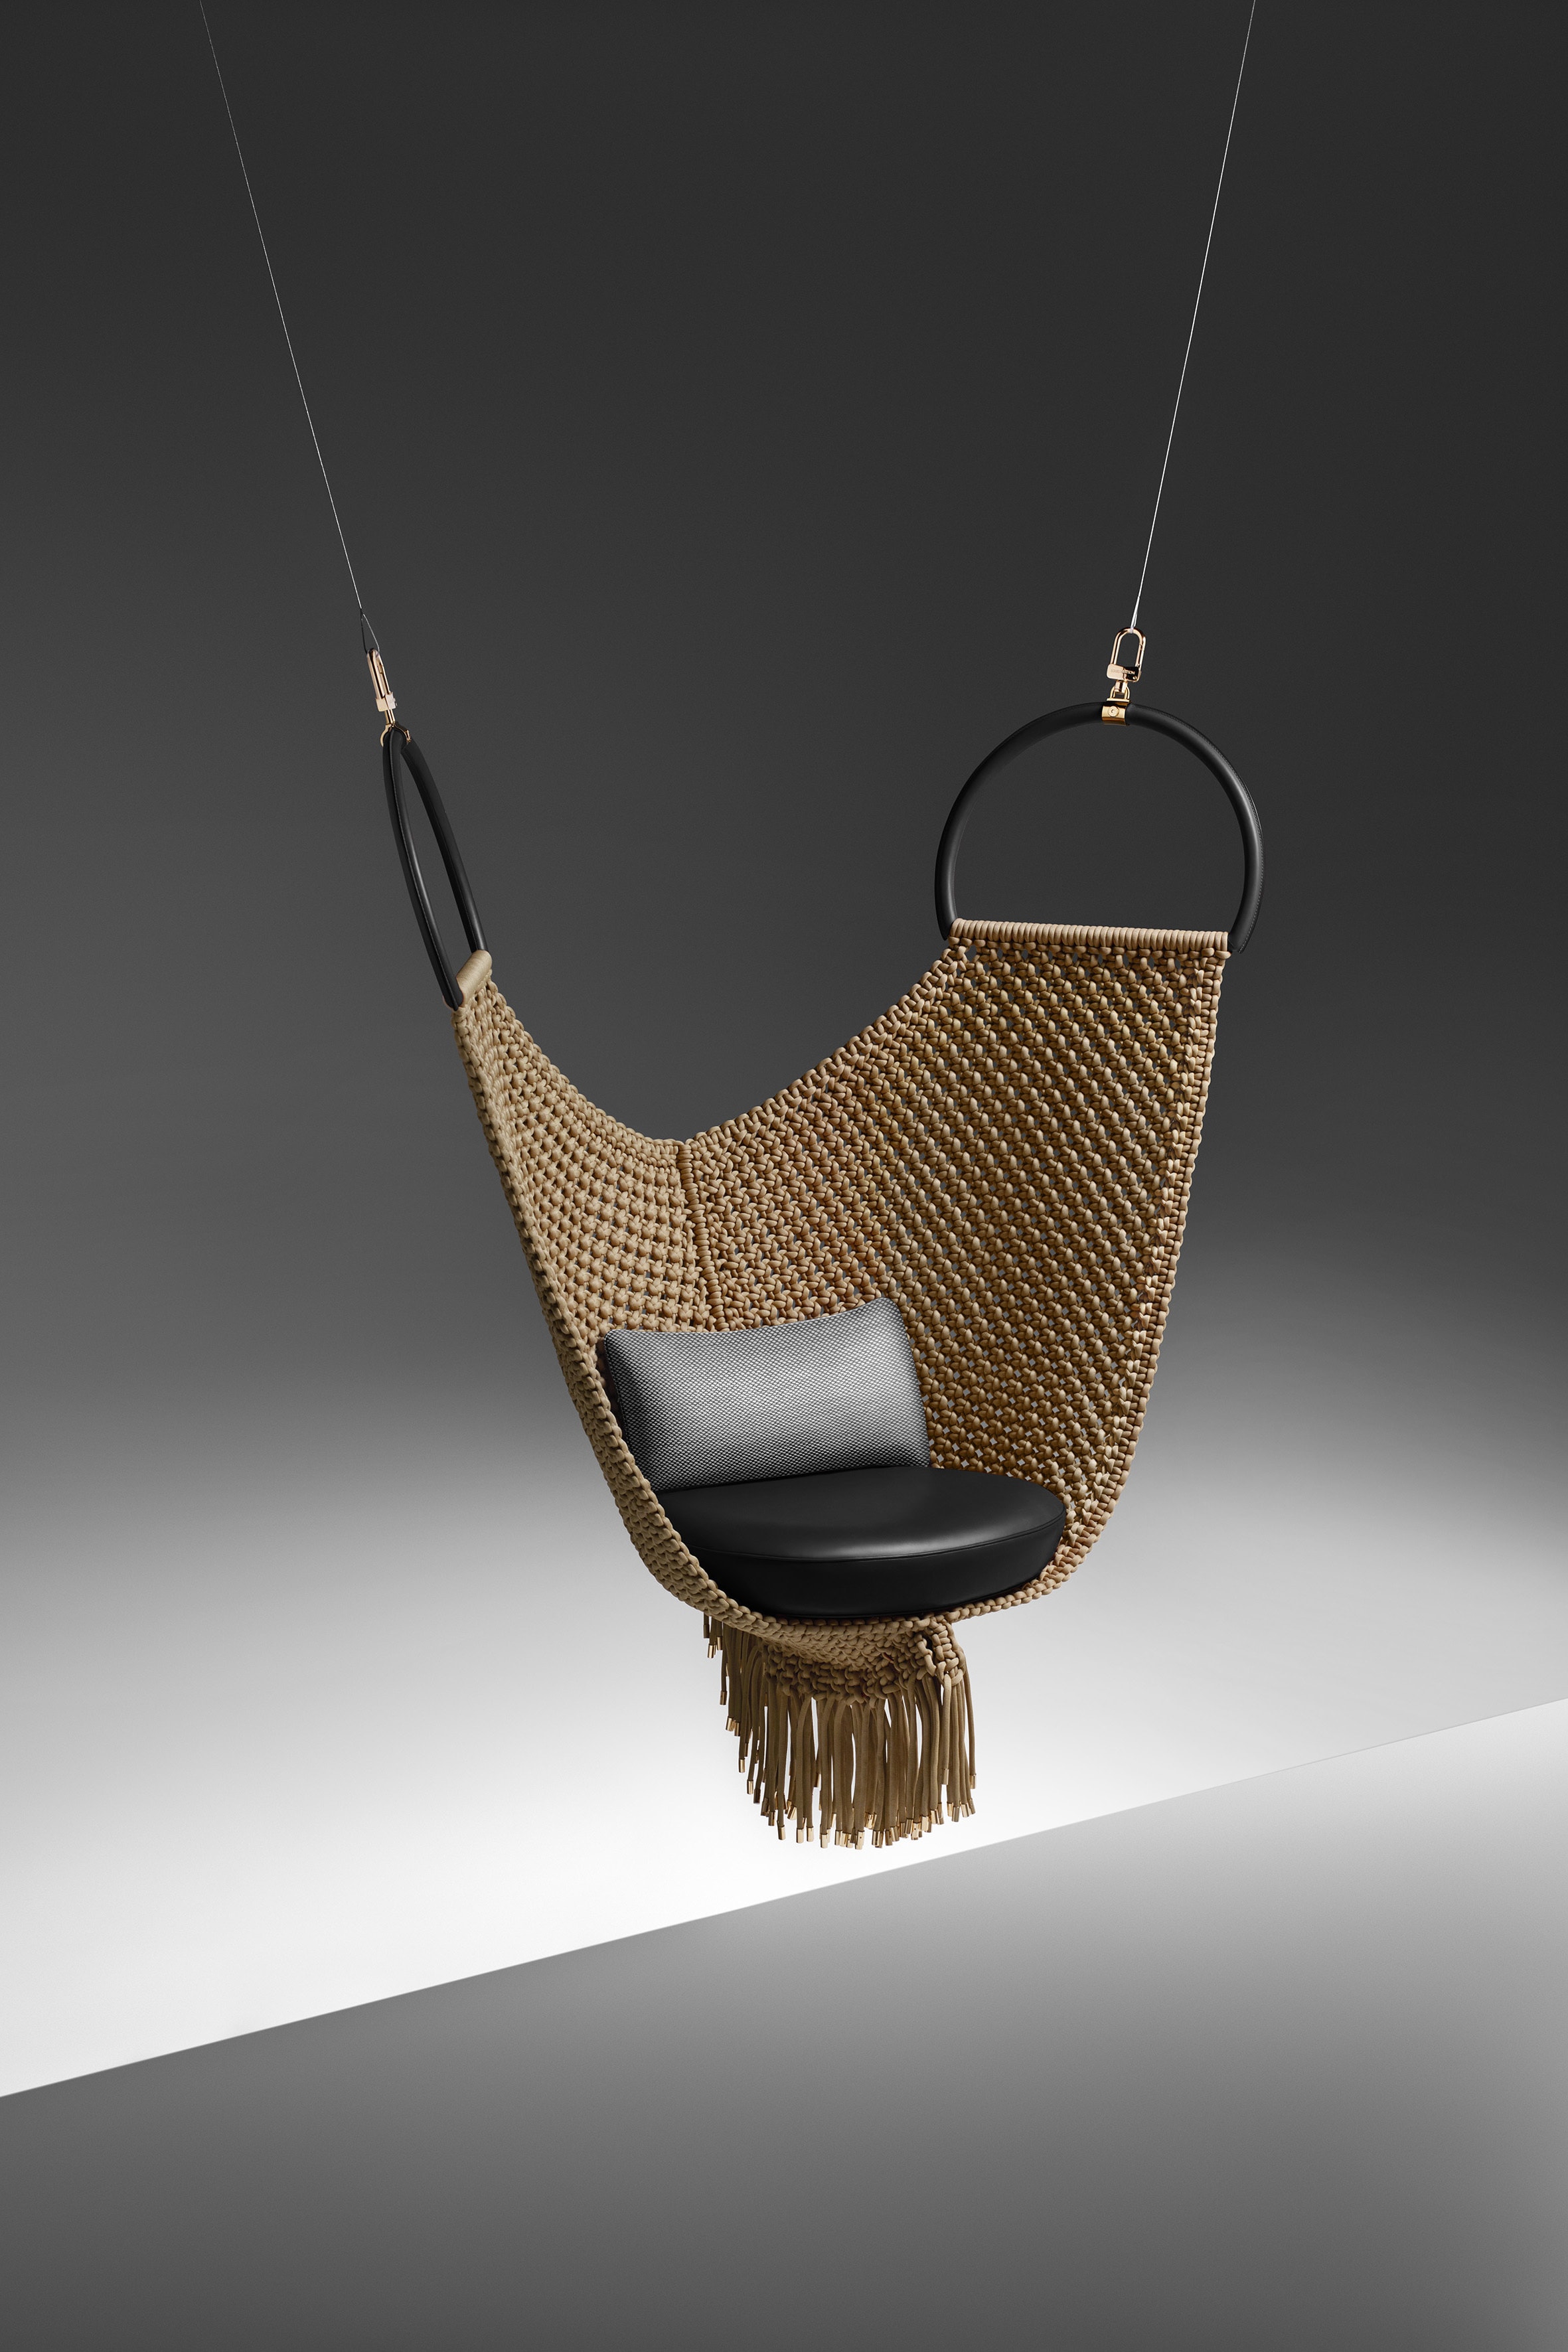 Louis Vuitton Objets Nomades Hanging Chair